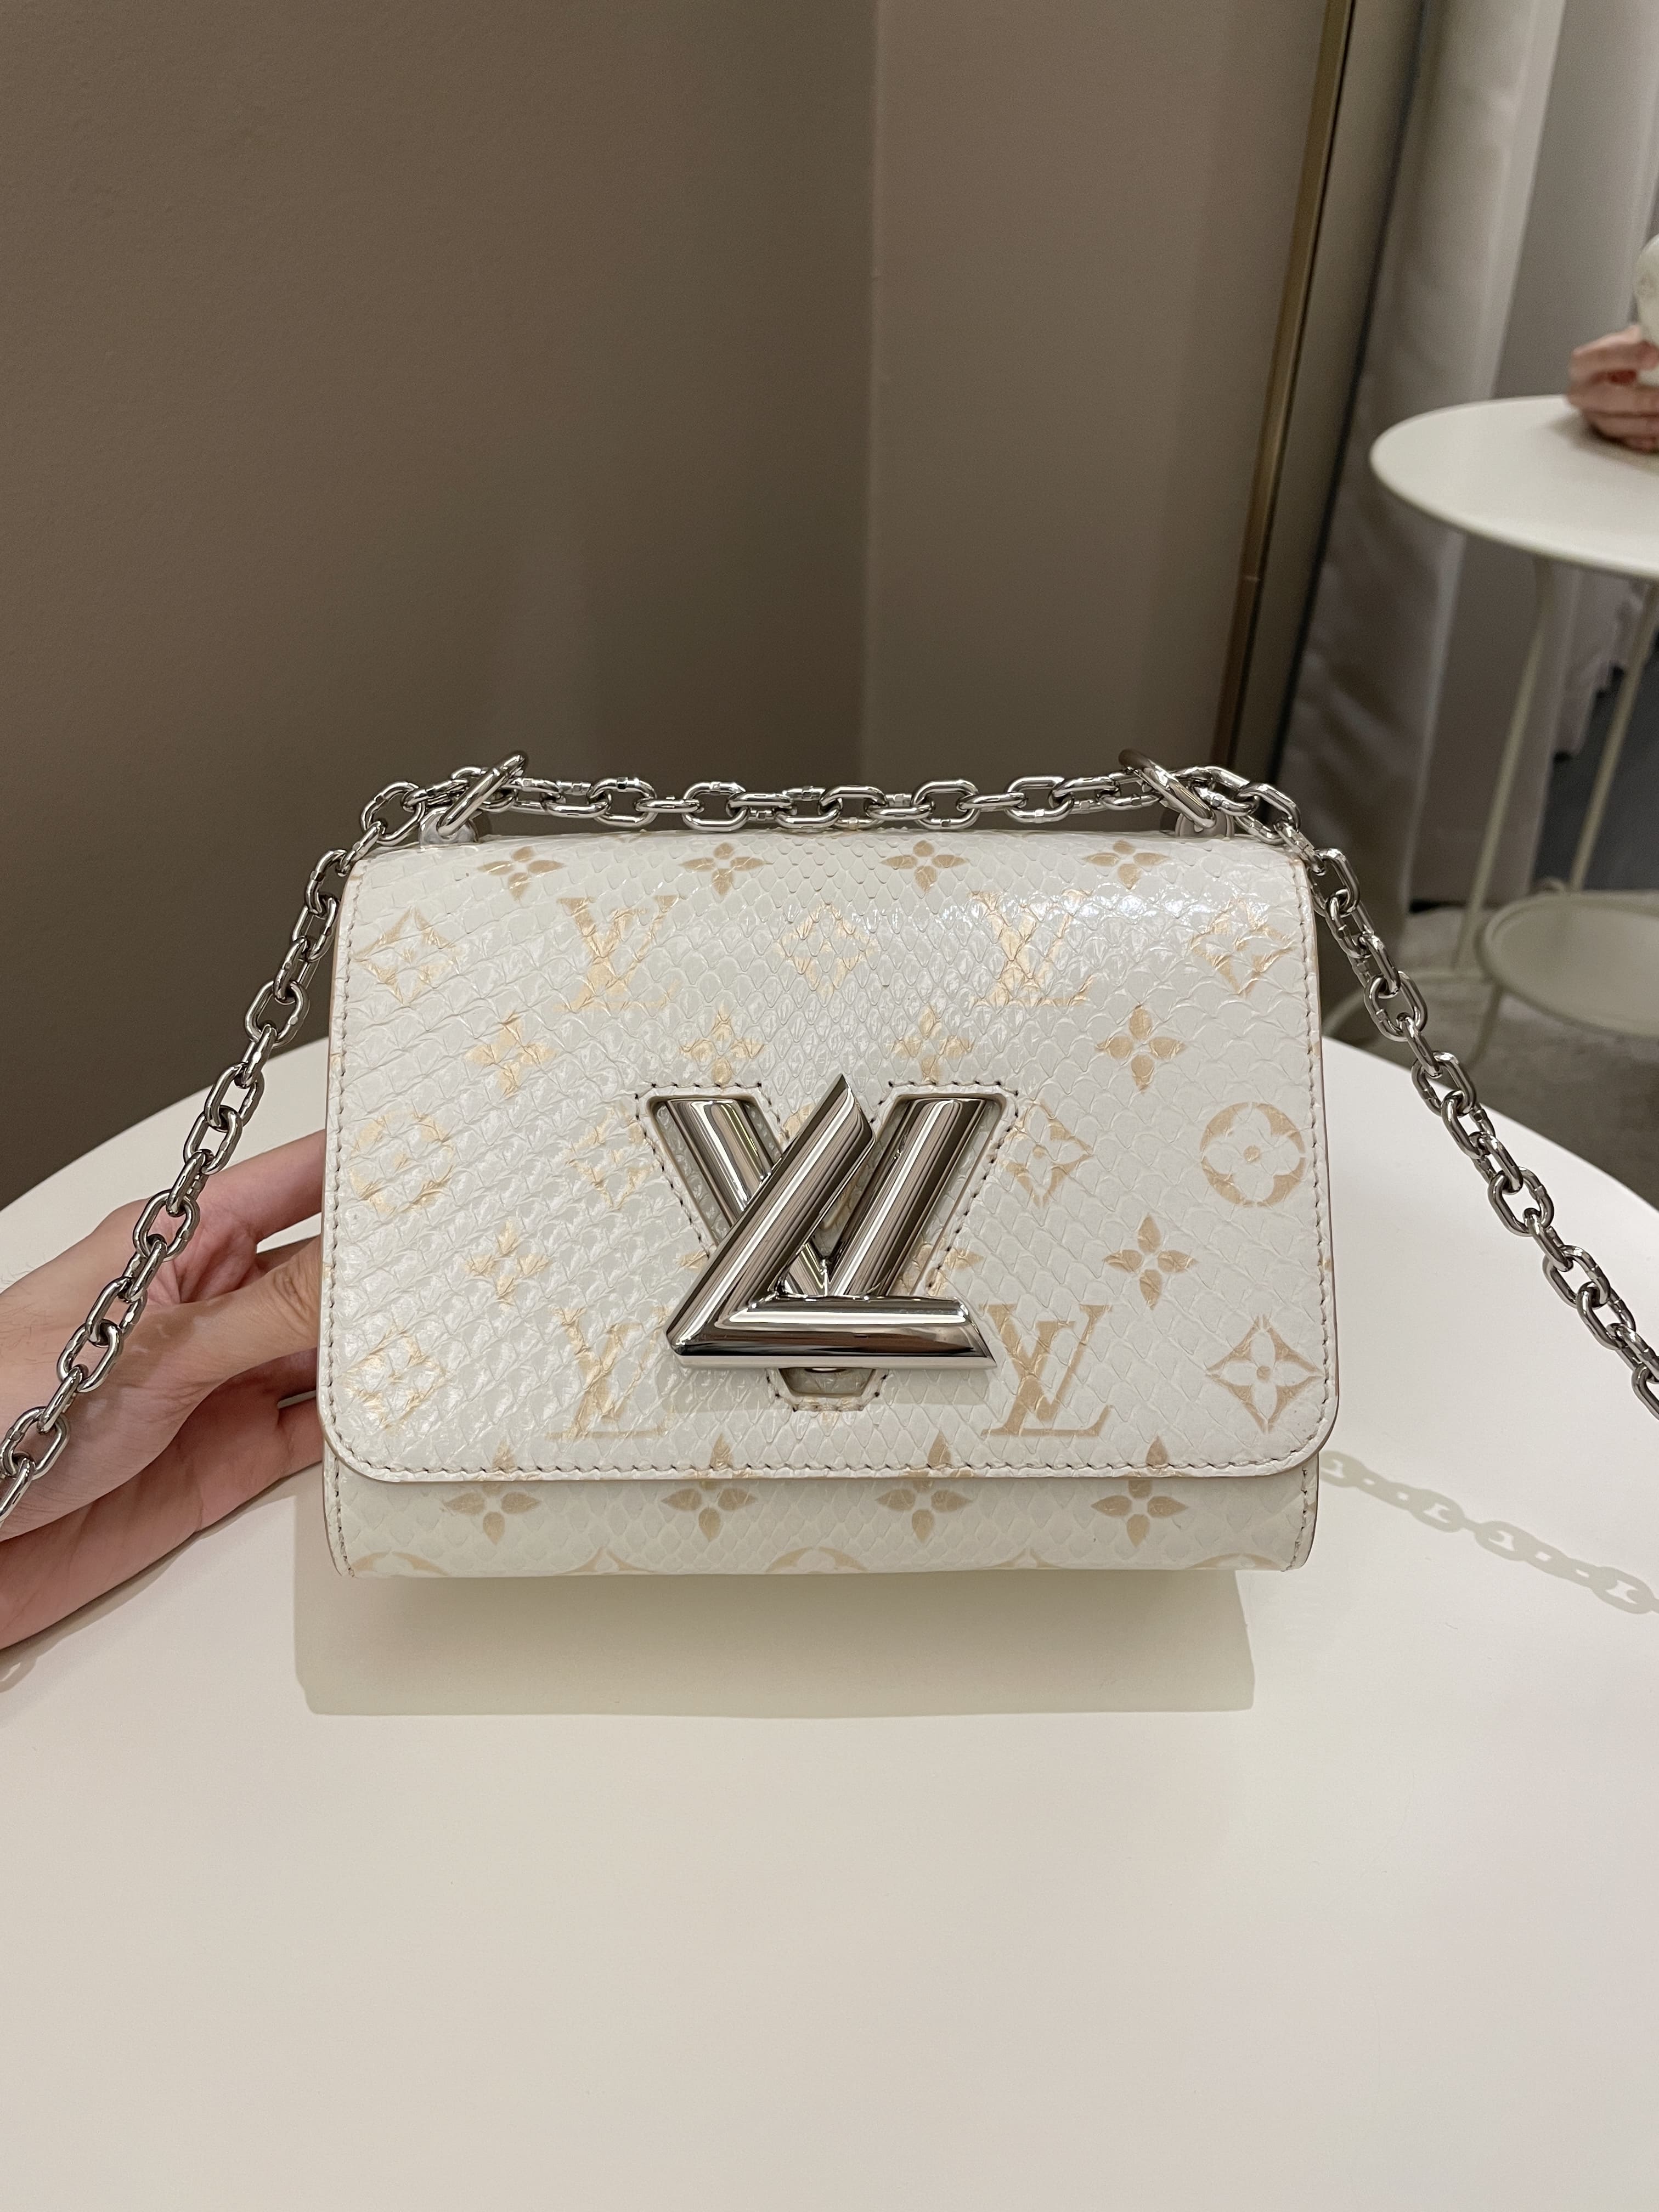 LV TWIST BAG, REVIEW WITH PROS & CONS